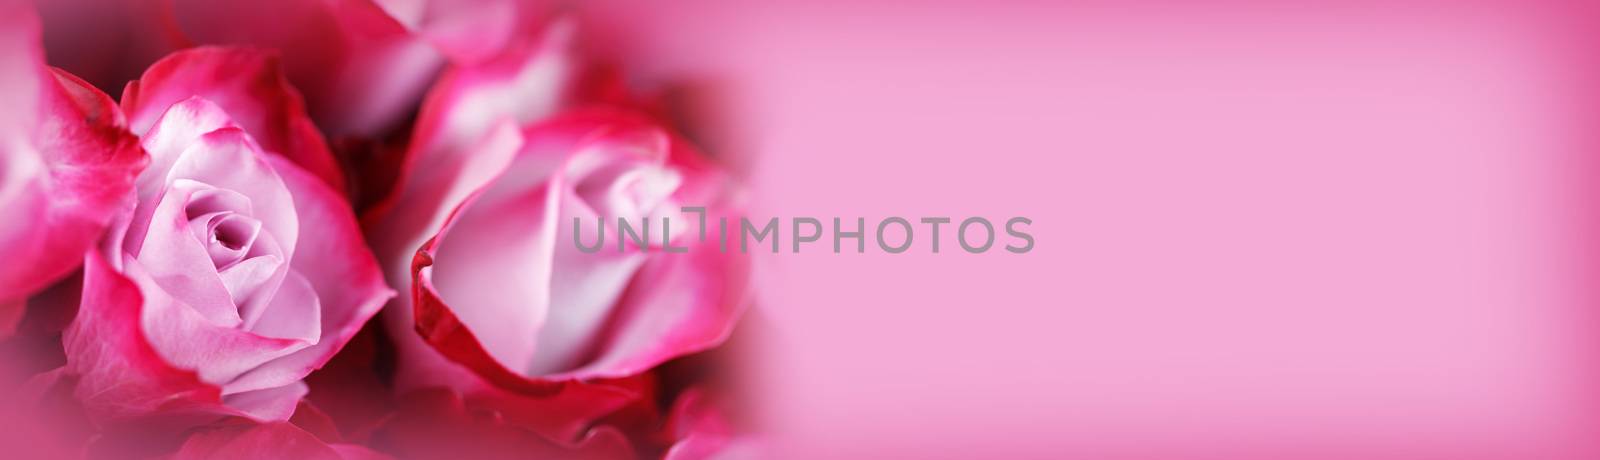 Pink rose flowers background by Yellowj